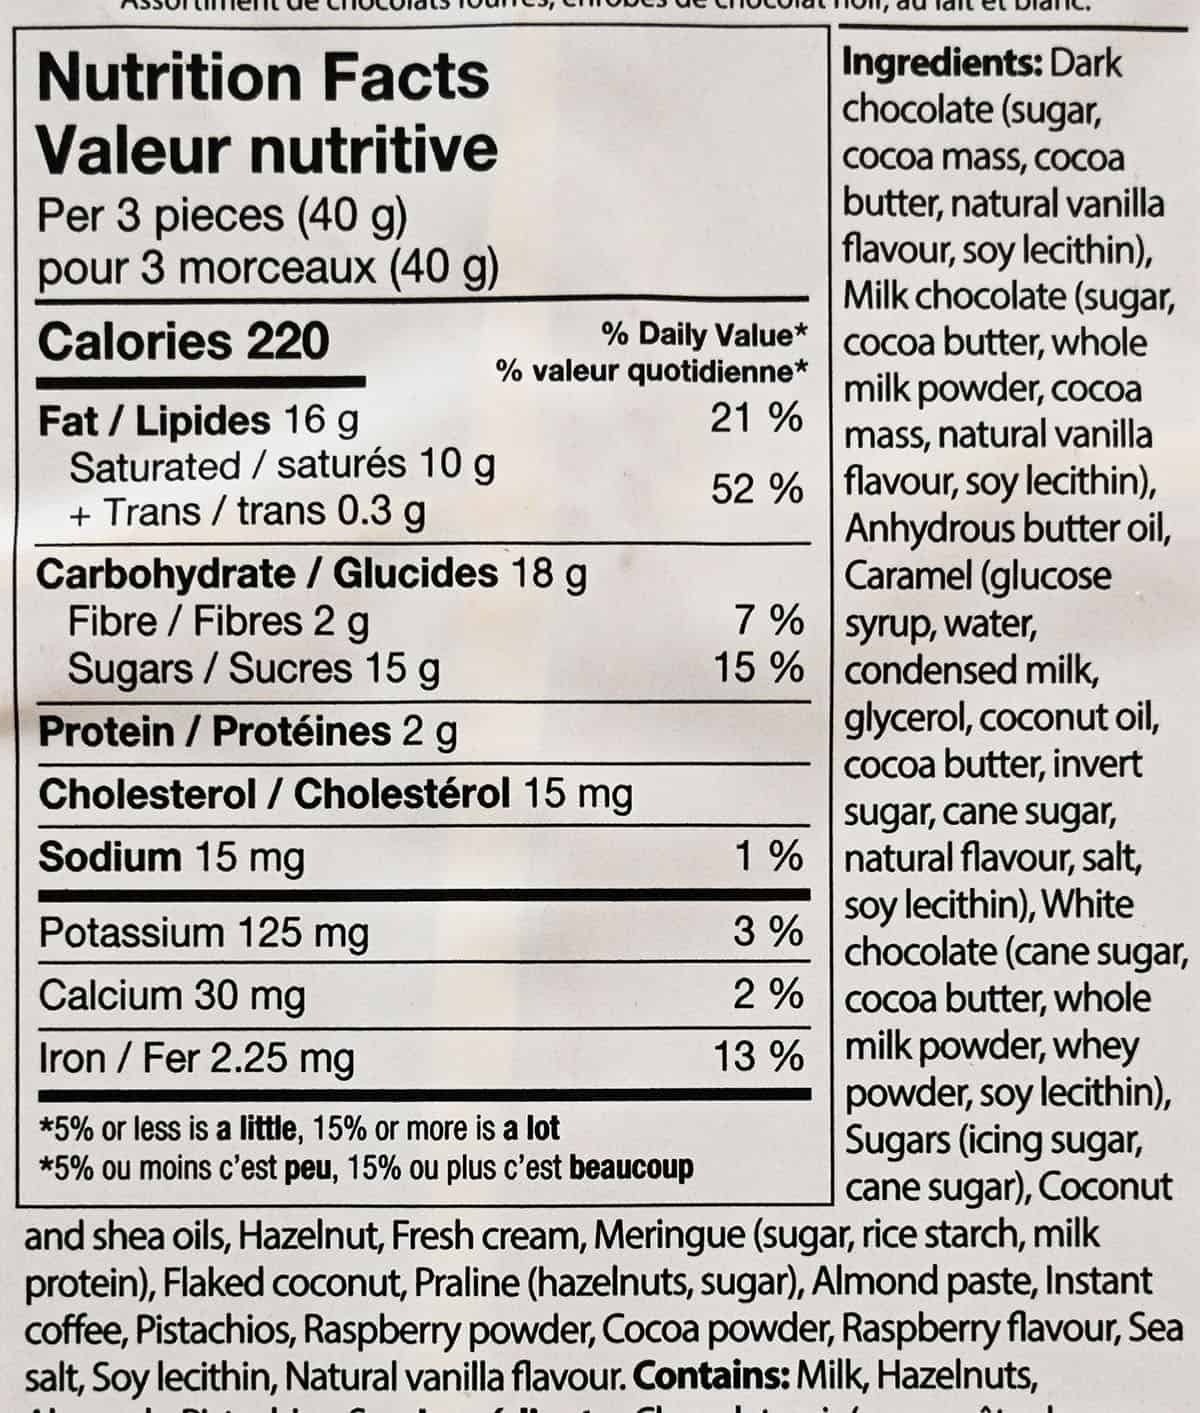 Image of the nutrition facts and ingredients from the box.